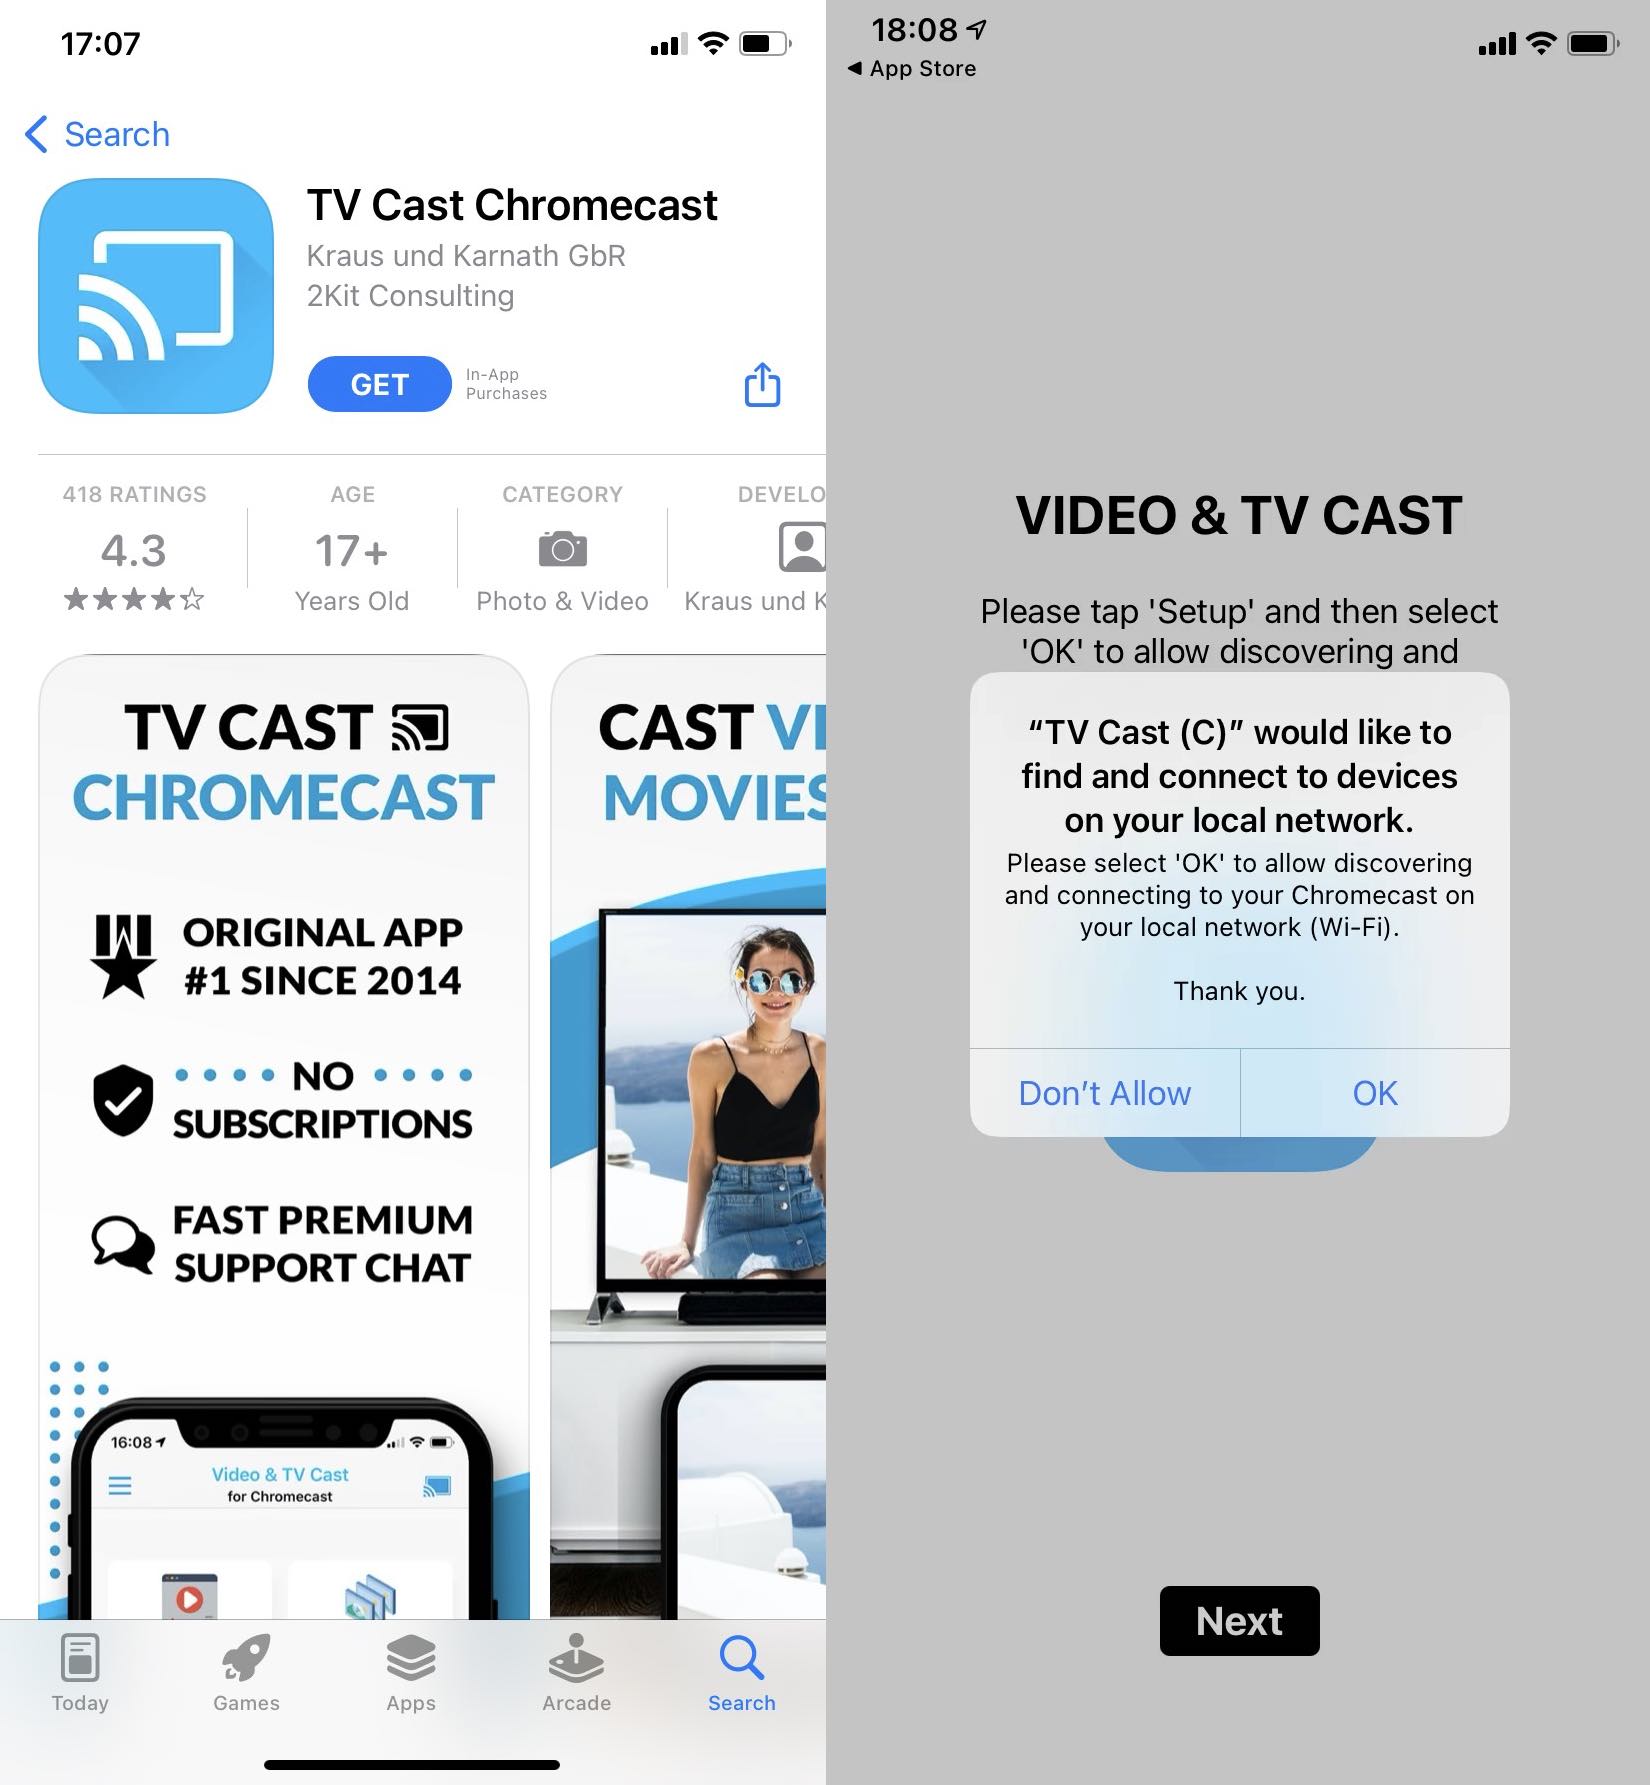 Allow TV Cast Chromecast app to connect to your device